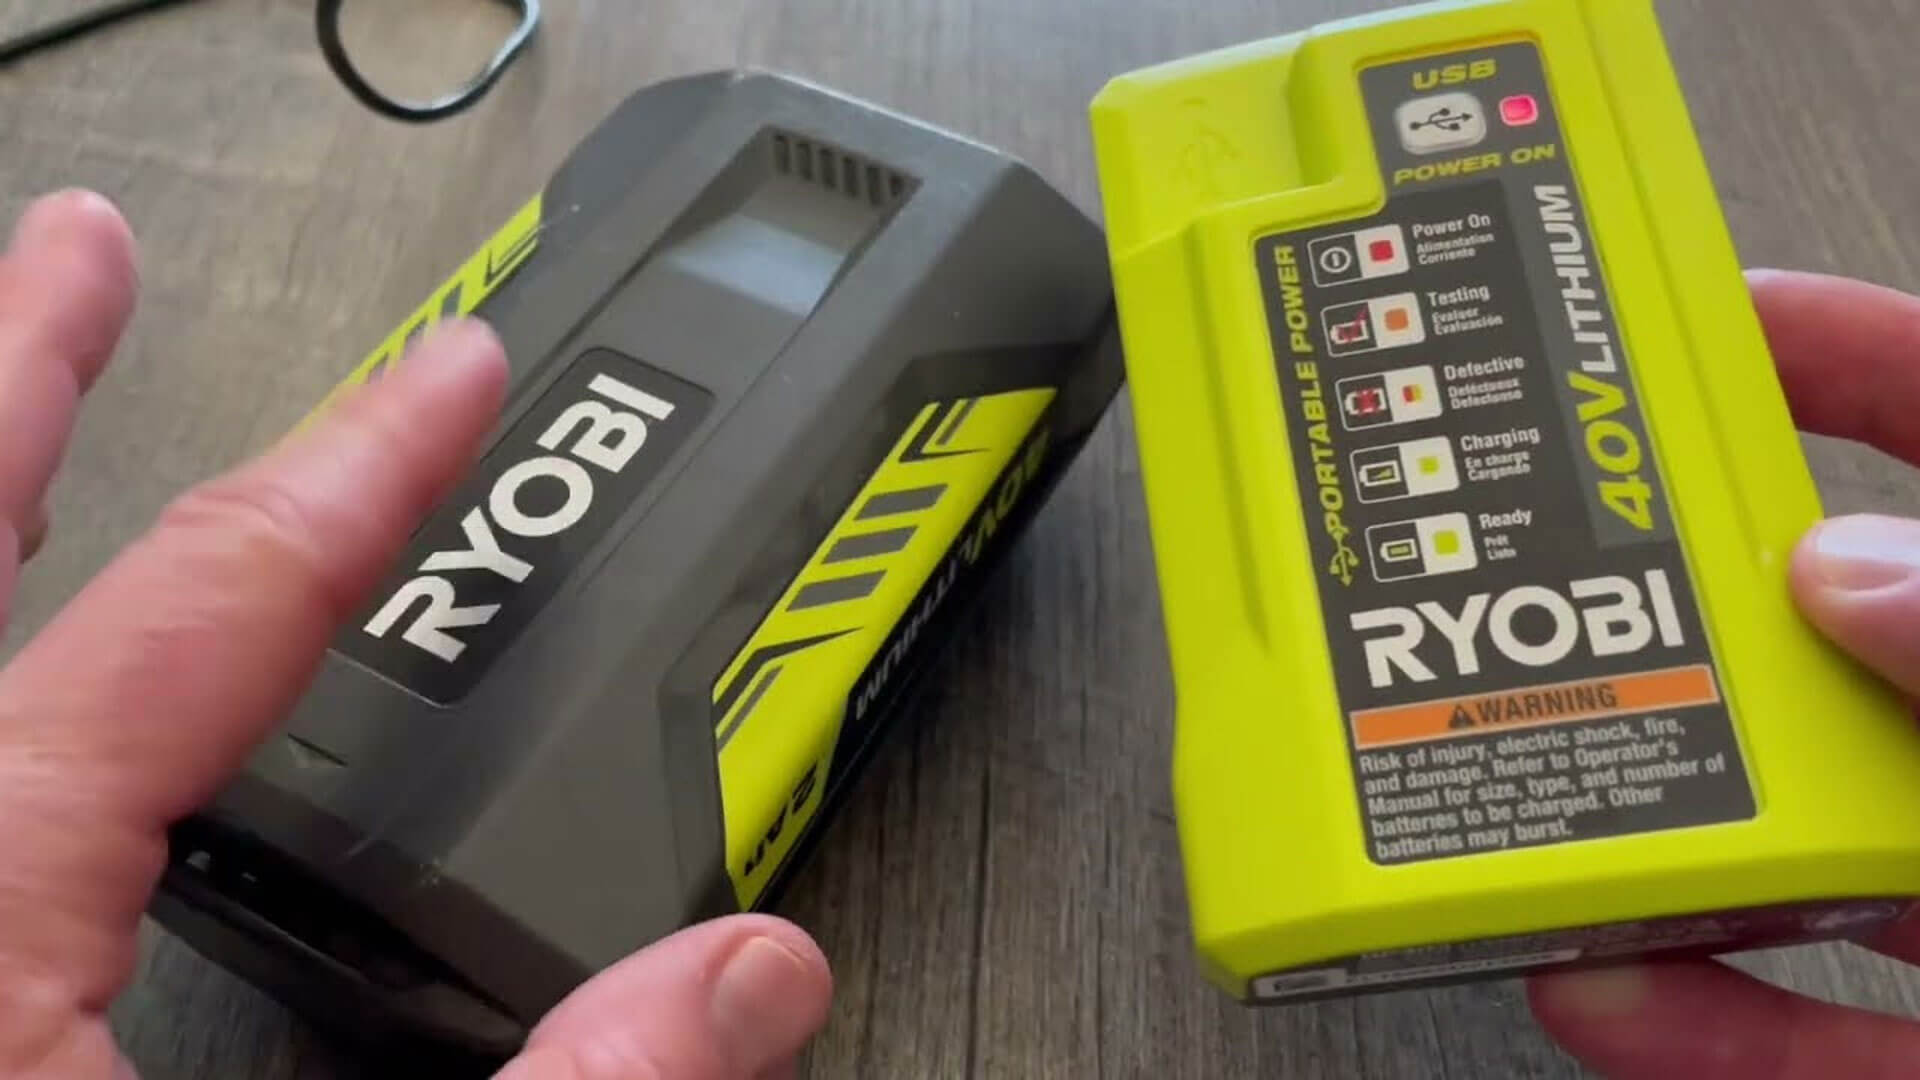 Ryobi Battery Chargers - Why Are They Blinking Green and Red?